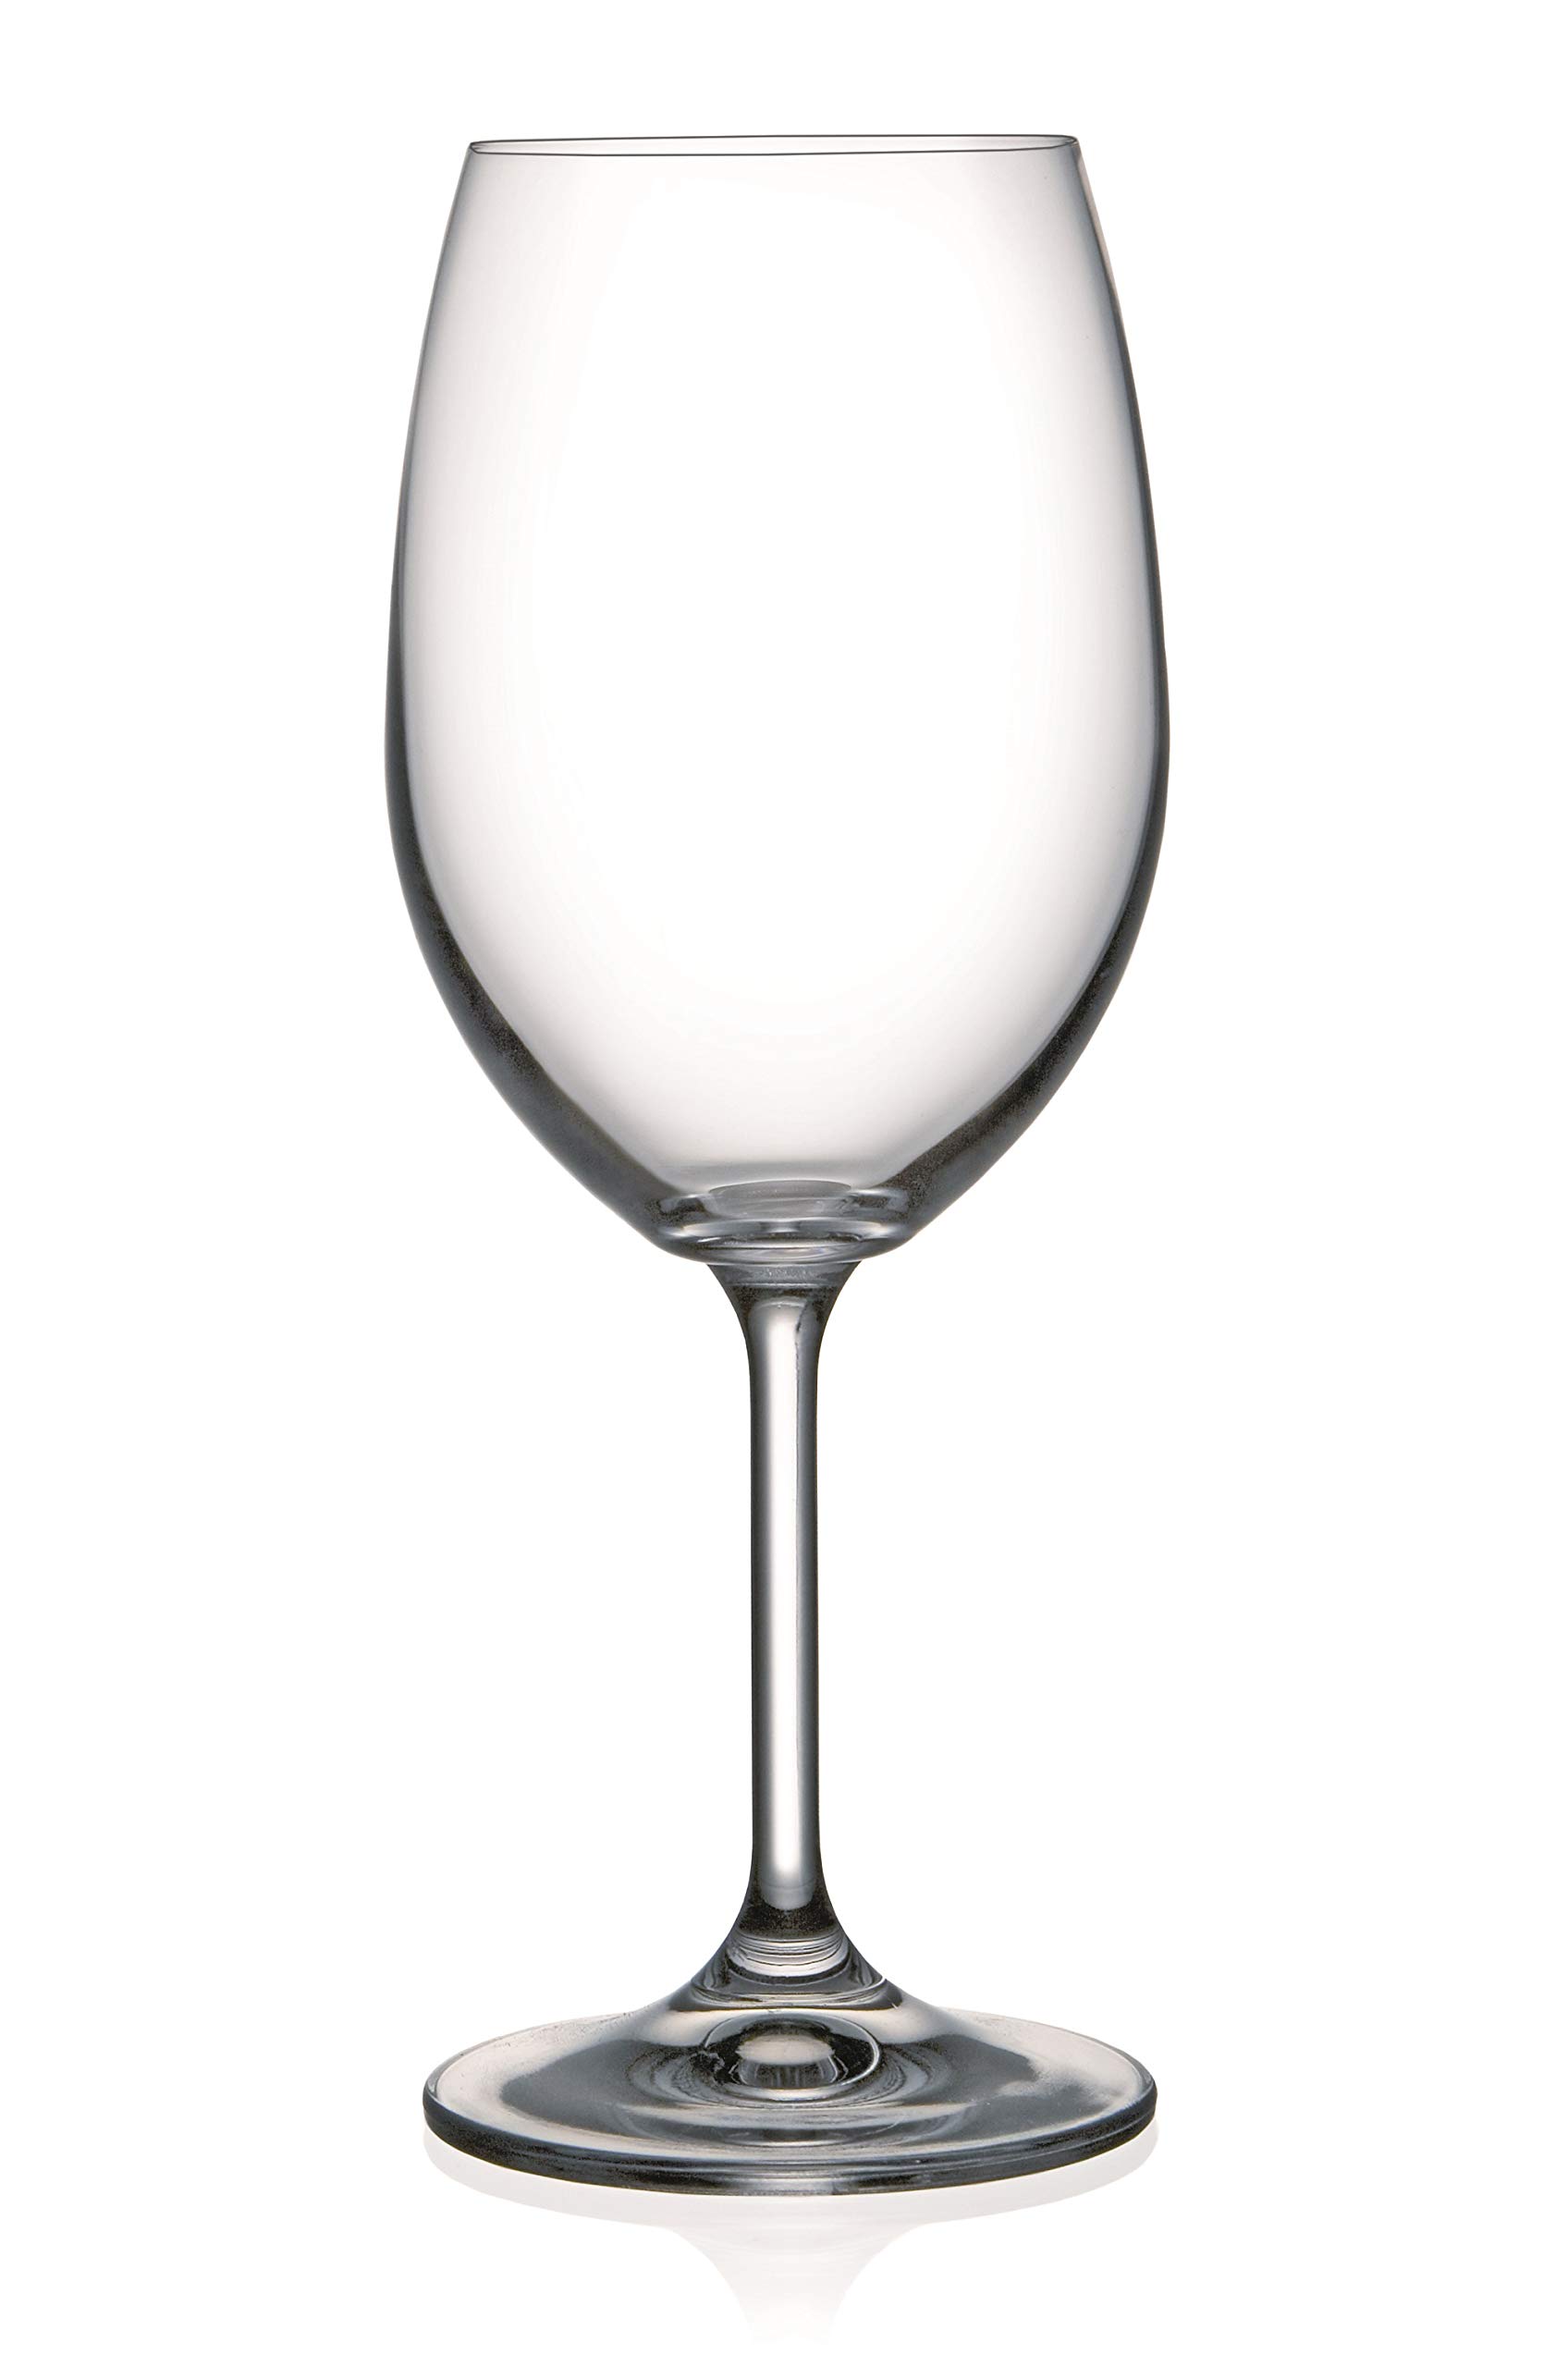 Wine Glass, Water, Goblet Glasses, Clear, Crystal, Set of 6, Stemmed Glass, by Barski, Made in Europe, 24 oz.